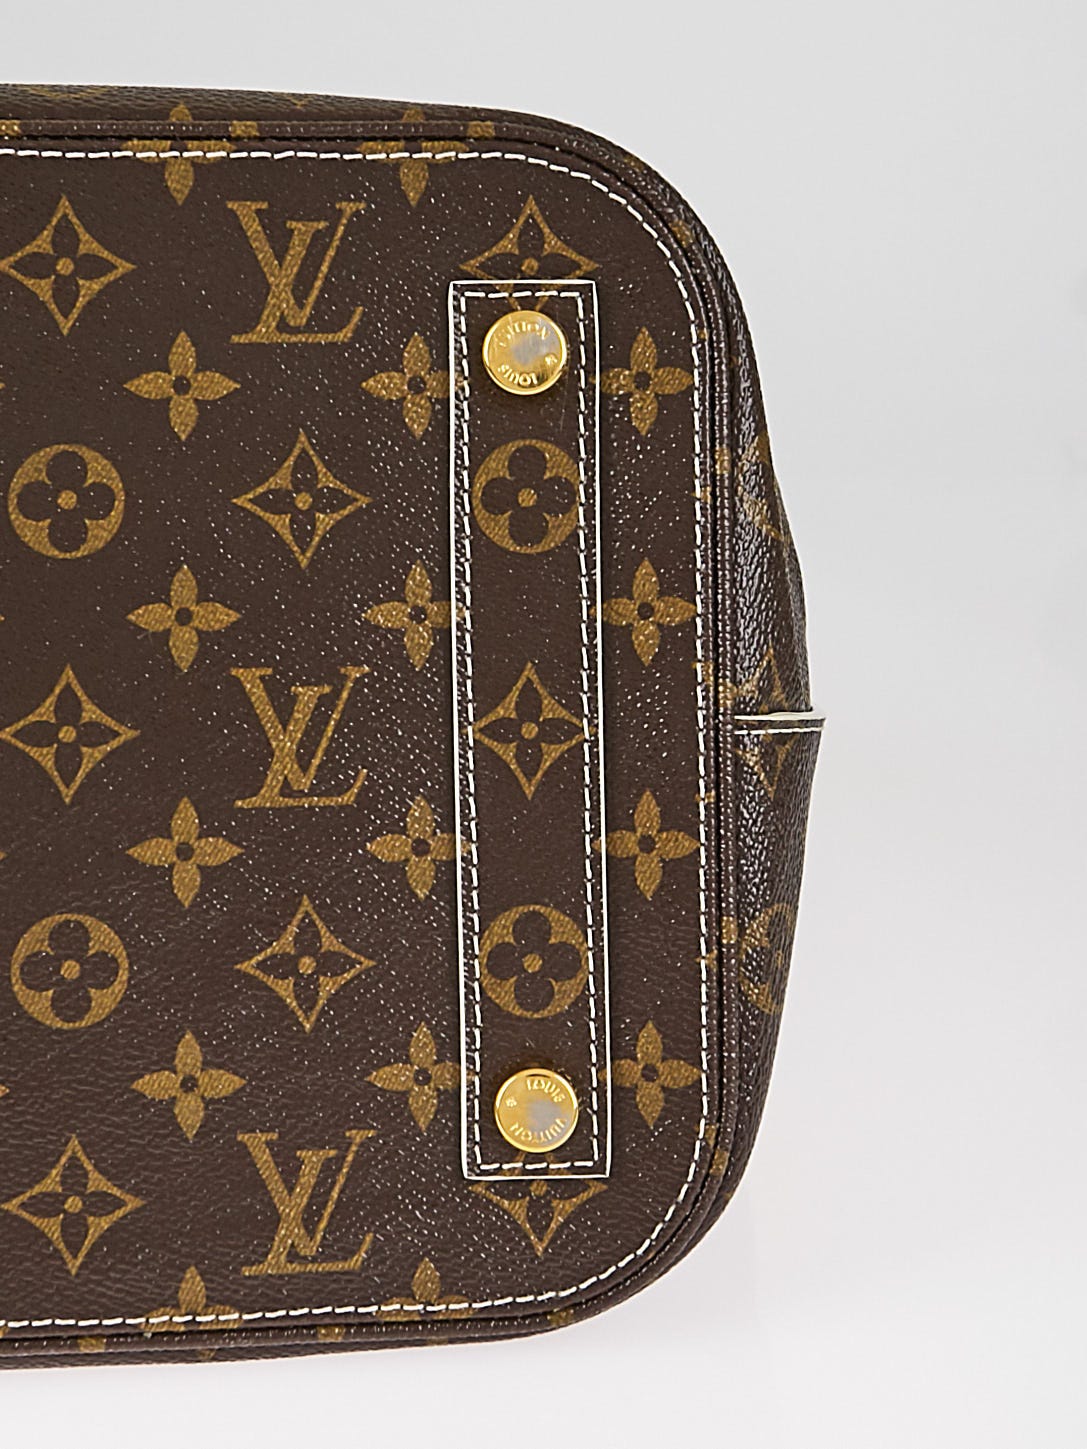 Louis Vuitton Packall Travel Bag In Monogram Coated Canvas Auction